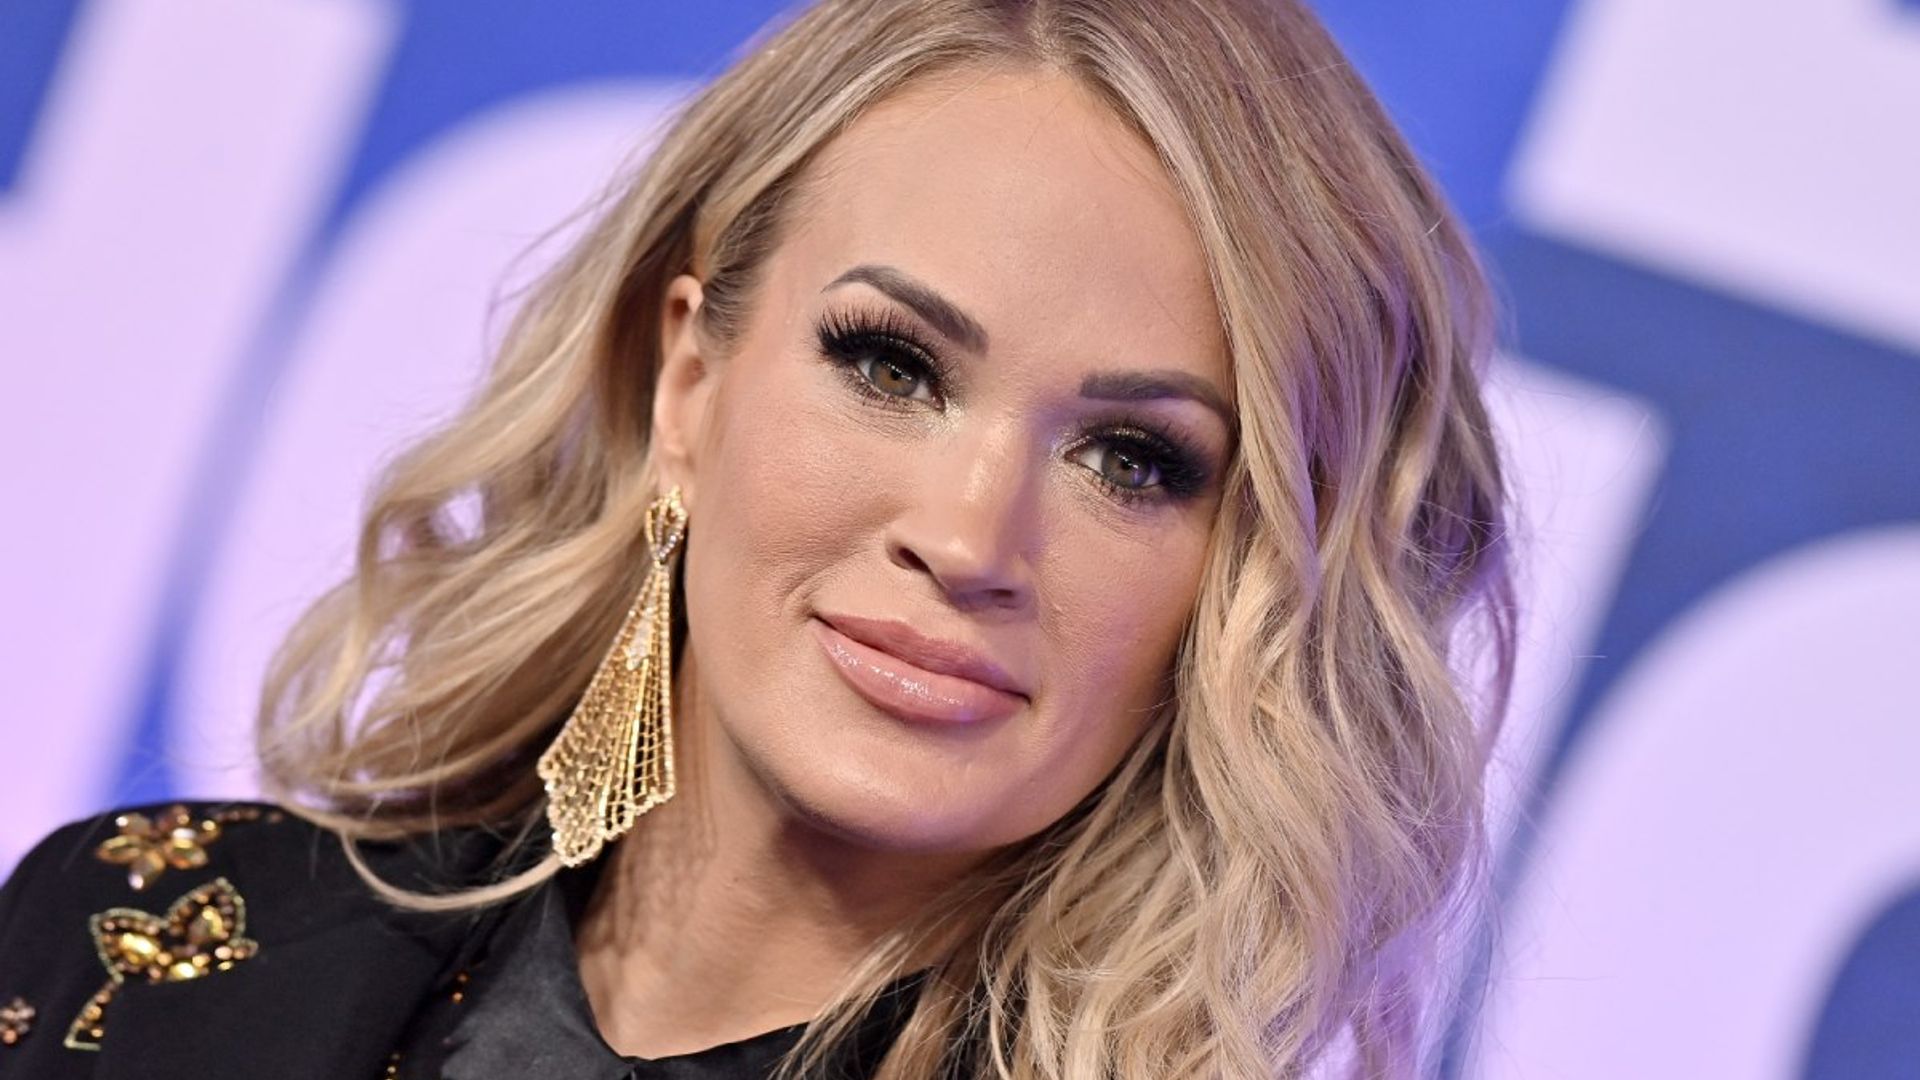 Carrie Underwood’s head-turning birthday gifts will leave you lost for words